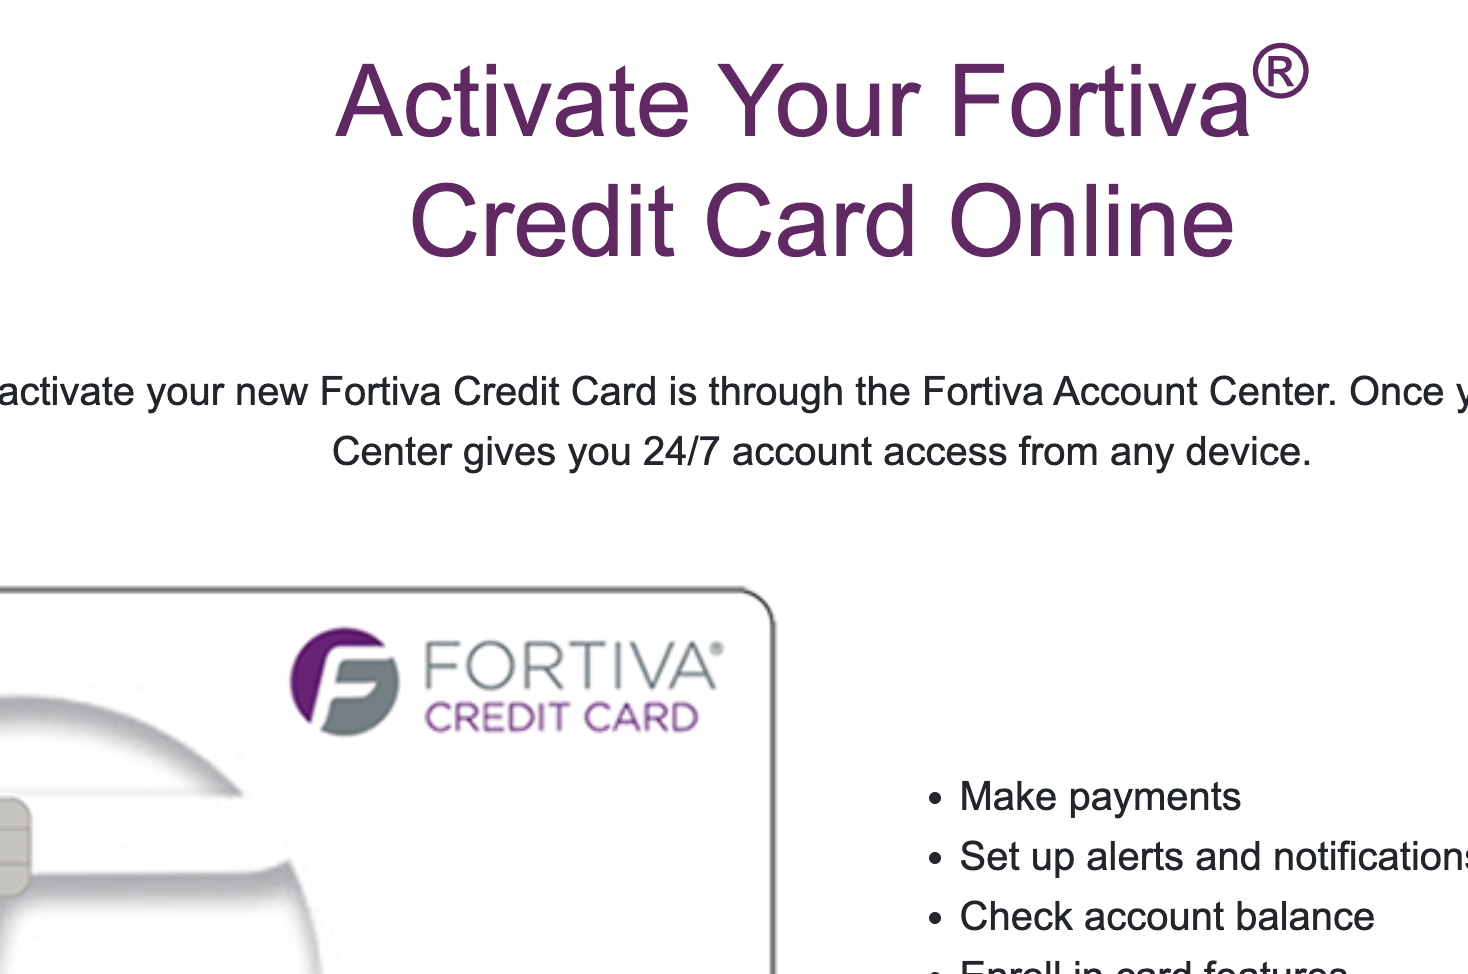 Fortiva Credit Card Acceptance Code